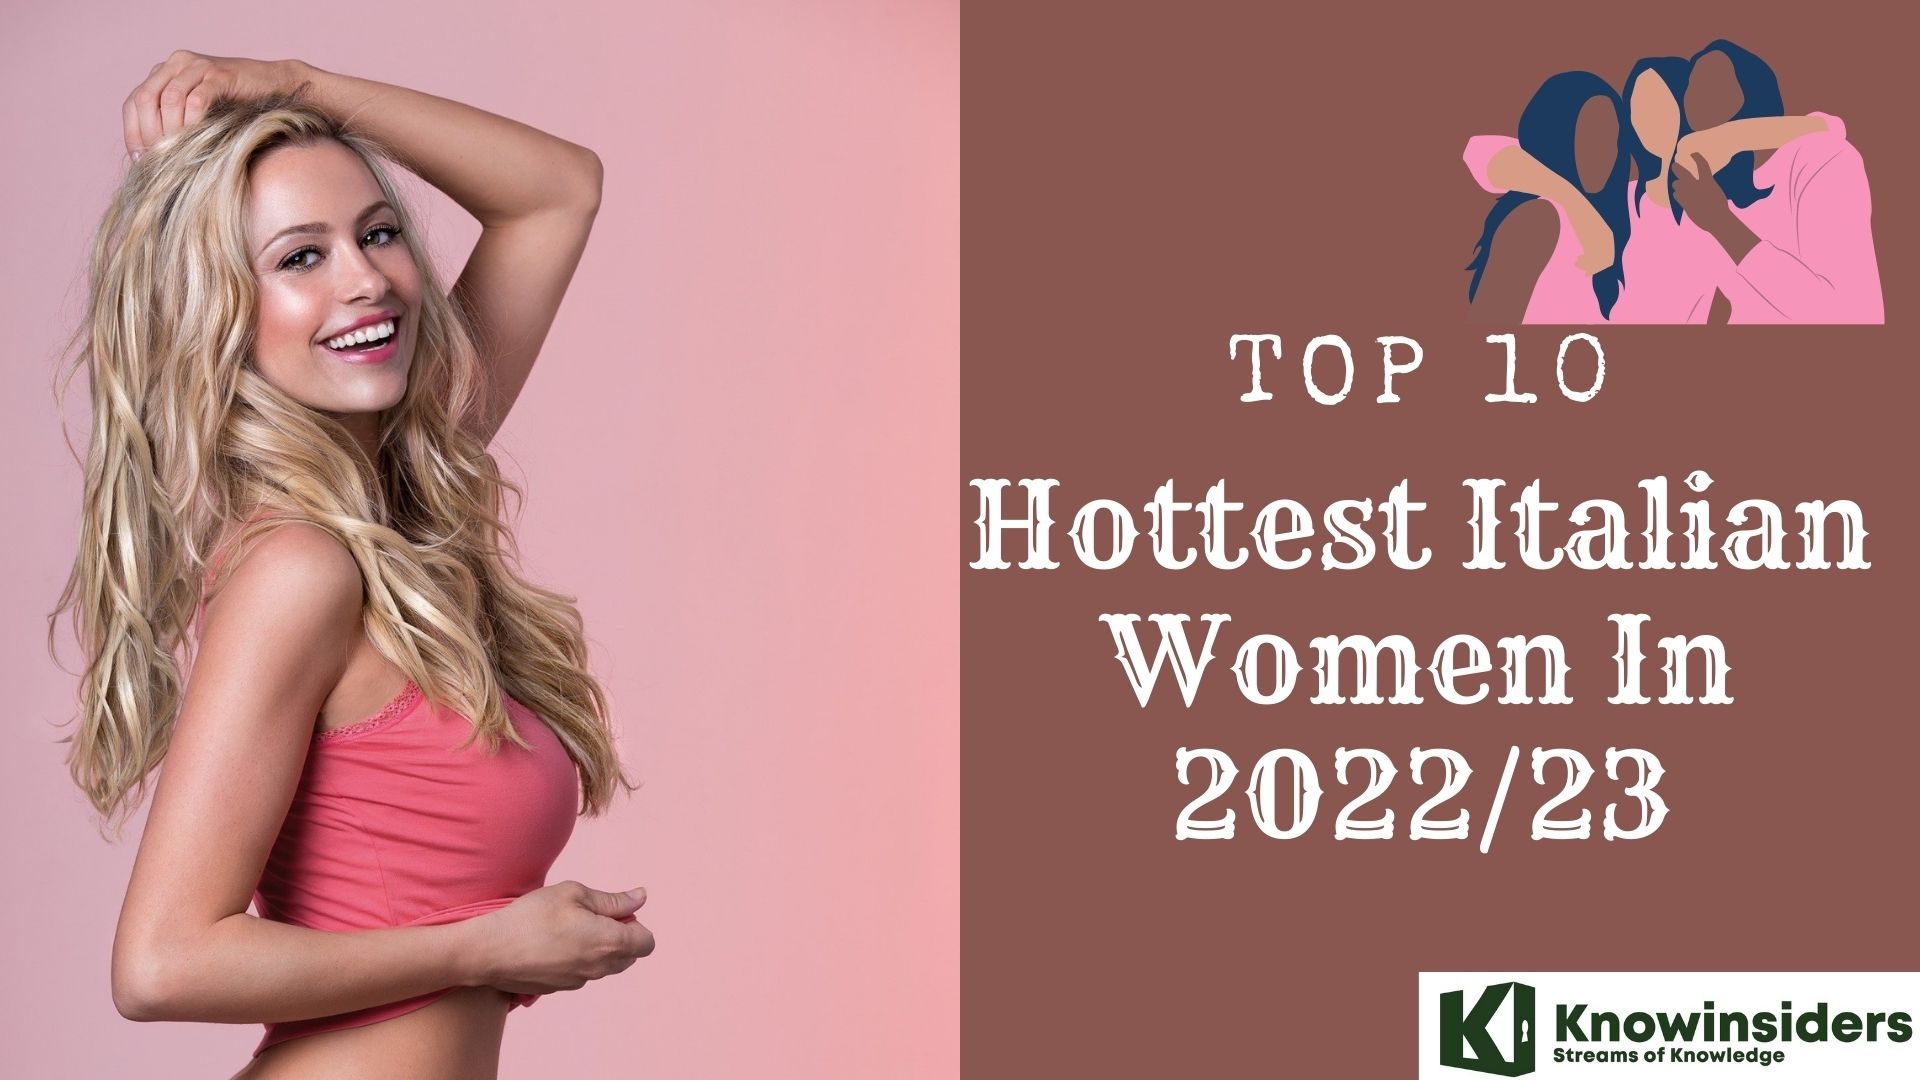 Top 10 Most Beautiful And Hottest Italian Women 2022/2023